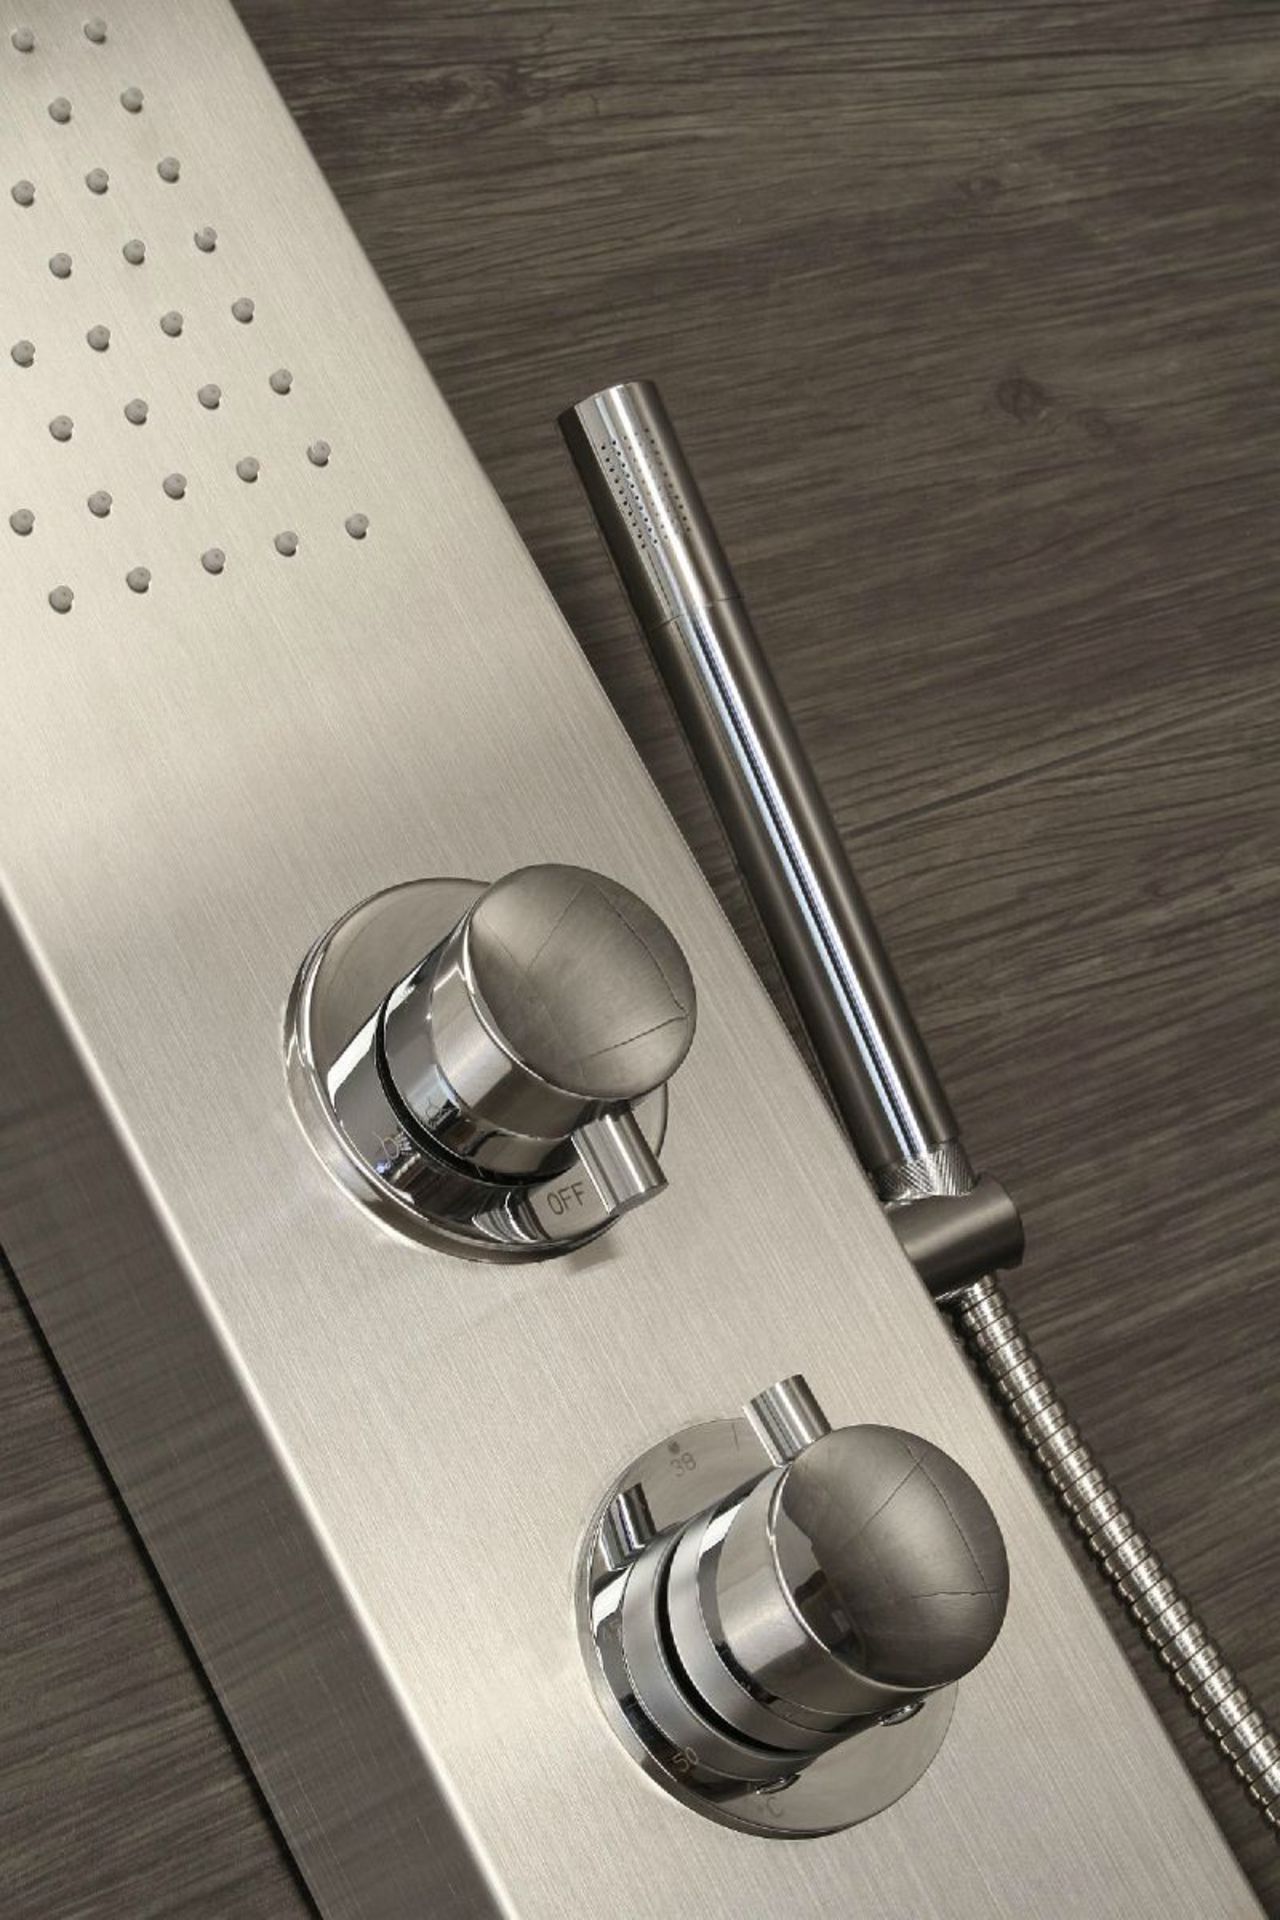 (JL5) Brushed Steel Shower Tower With Luxury body jets. RRP £699.99.Built-in jets provide a r... - Image 3 of 3